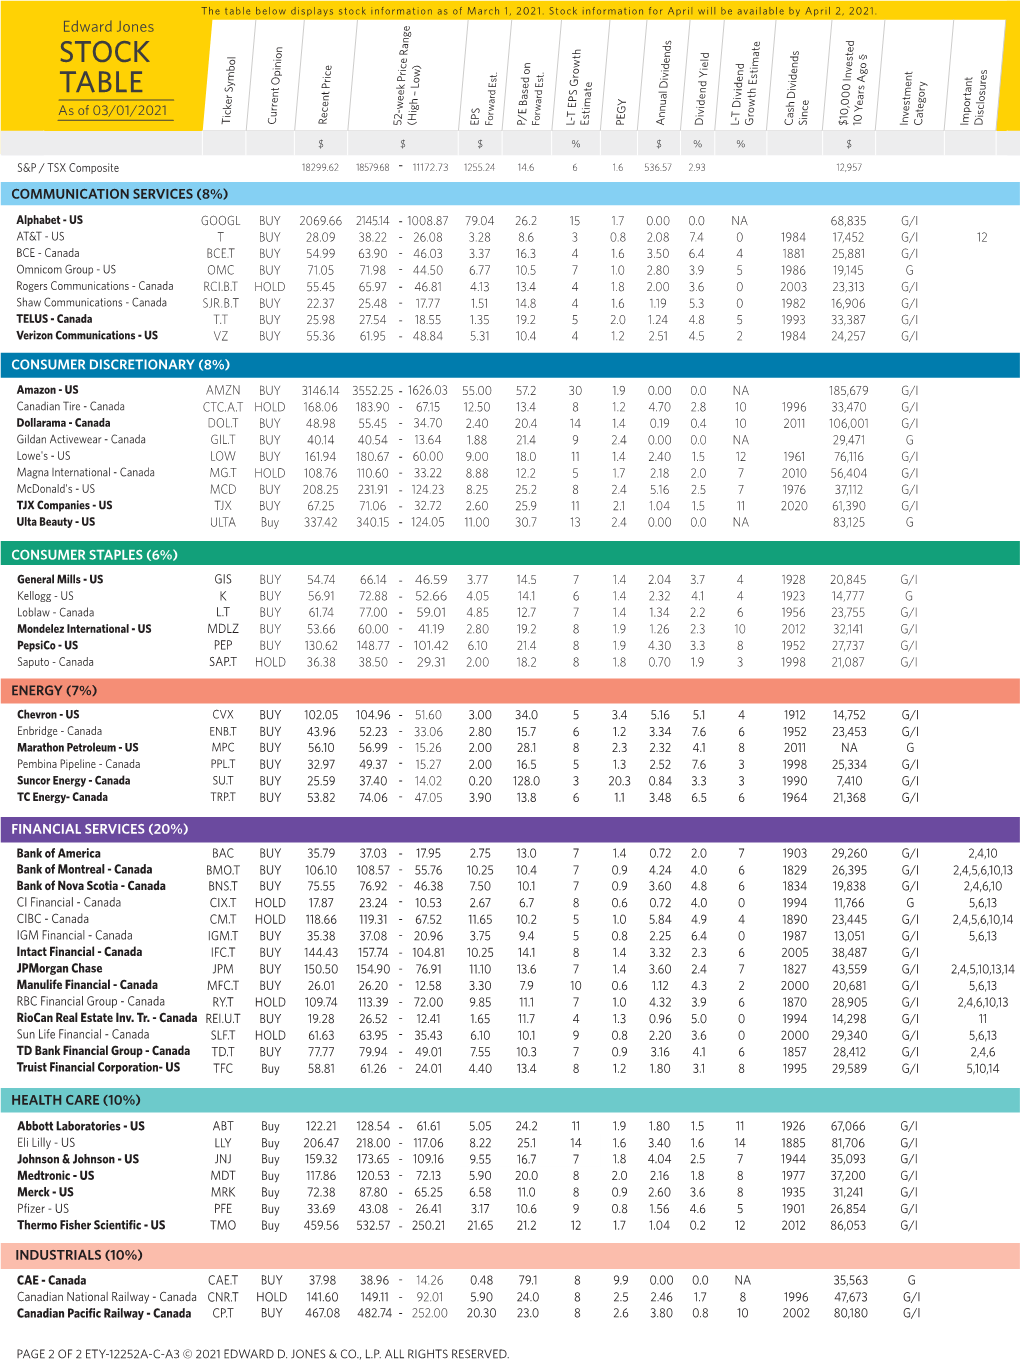 STOCK TABLE As of 03/01/2021 Ticker Symbol Current Opinion Recent Price 52-Week Price Range (High – Low) EPS Forward Est